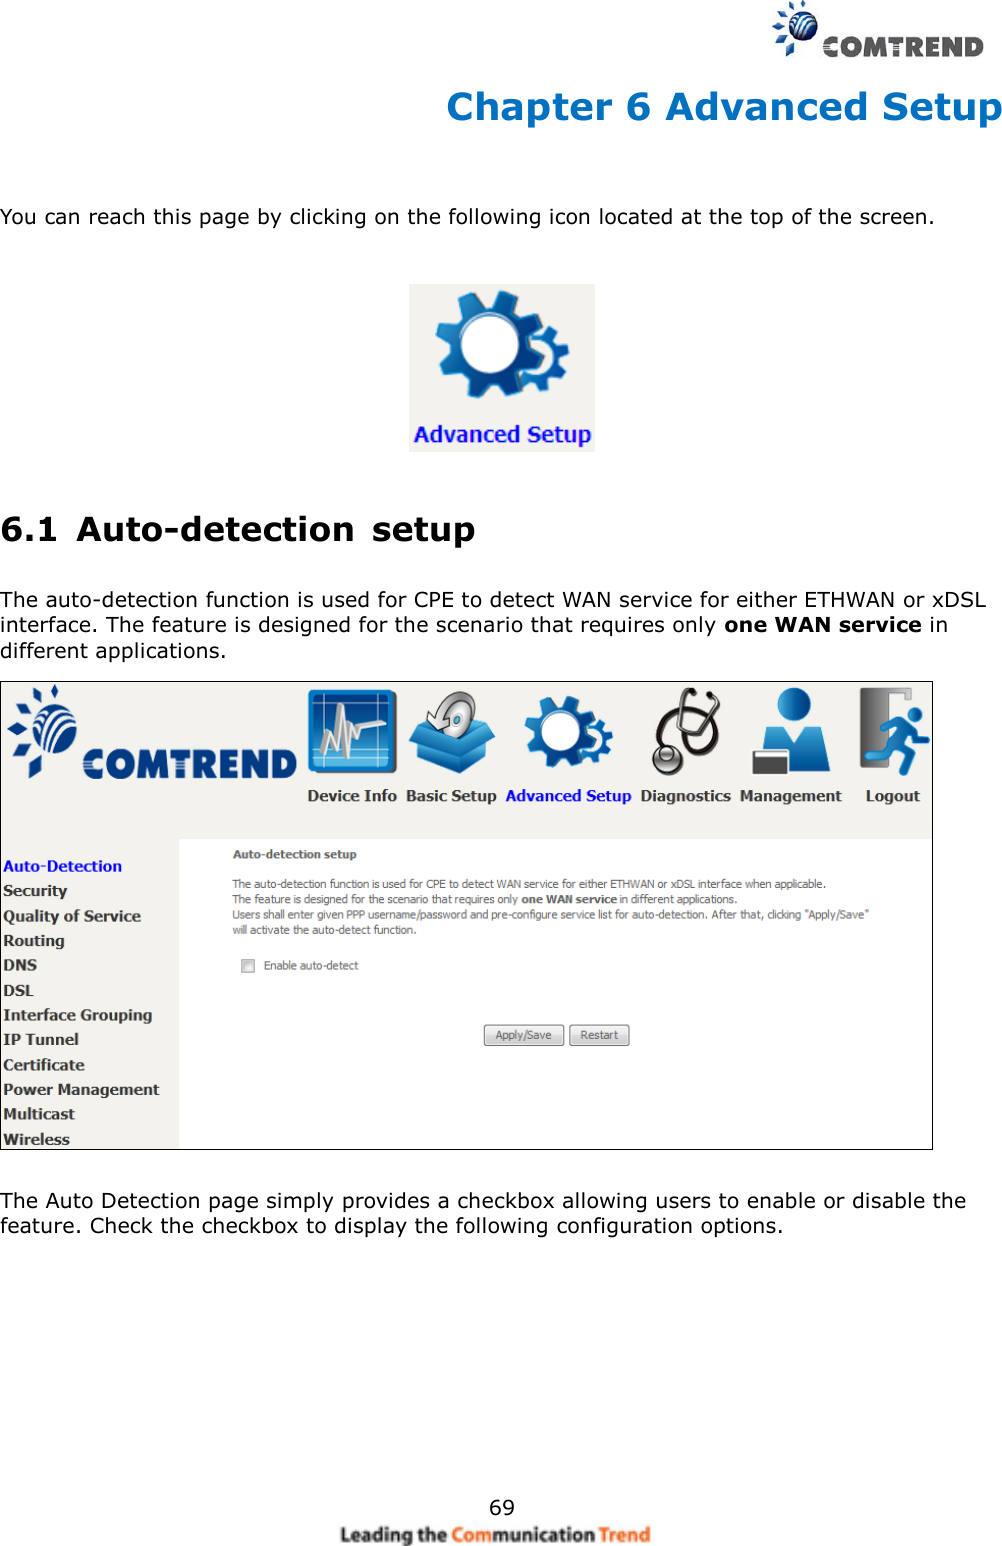     69 Chapter 6 Advanced Setup  You can reach this page by clicking on the following icon located at the top of the screen.  6.1  Auto-detection  setup The auto-detection function is used for CPE to detect WAN service for either ETHWAN or xDSL interface. The feature is designed for the scenario that requires only one WAN service in different applications.    The Auto Detection page simply provides a checkbox allowing users to enable or disable the feature. Check the checkbox to display the following configuration options.           